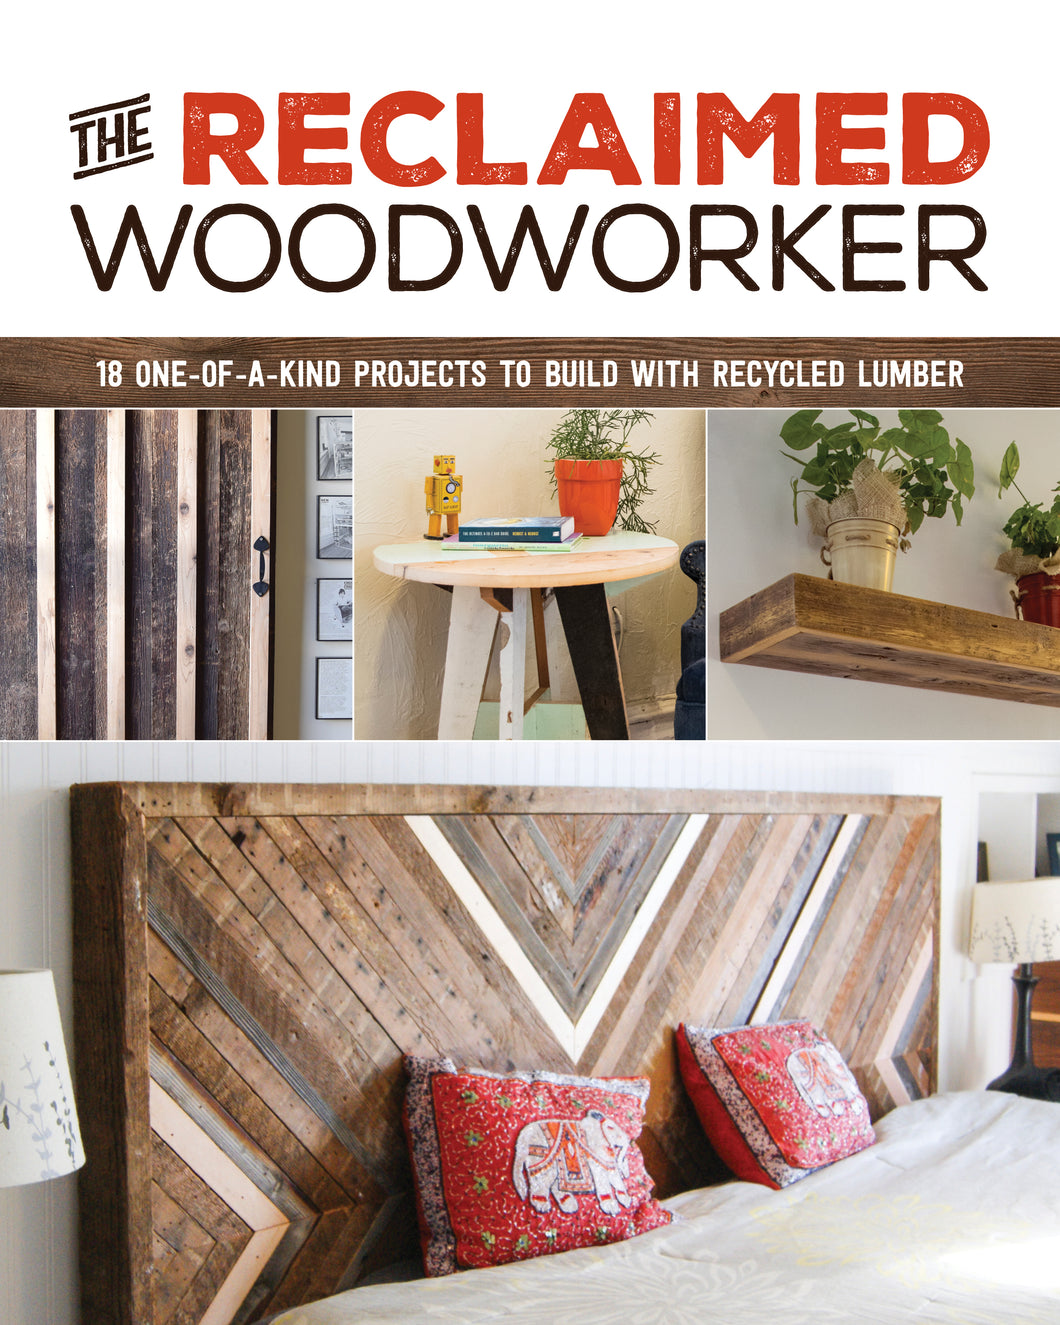 The Reclaimed Woodworker